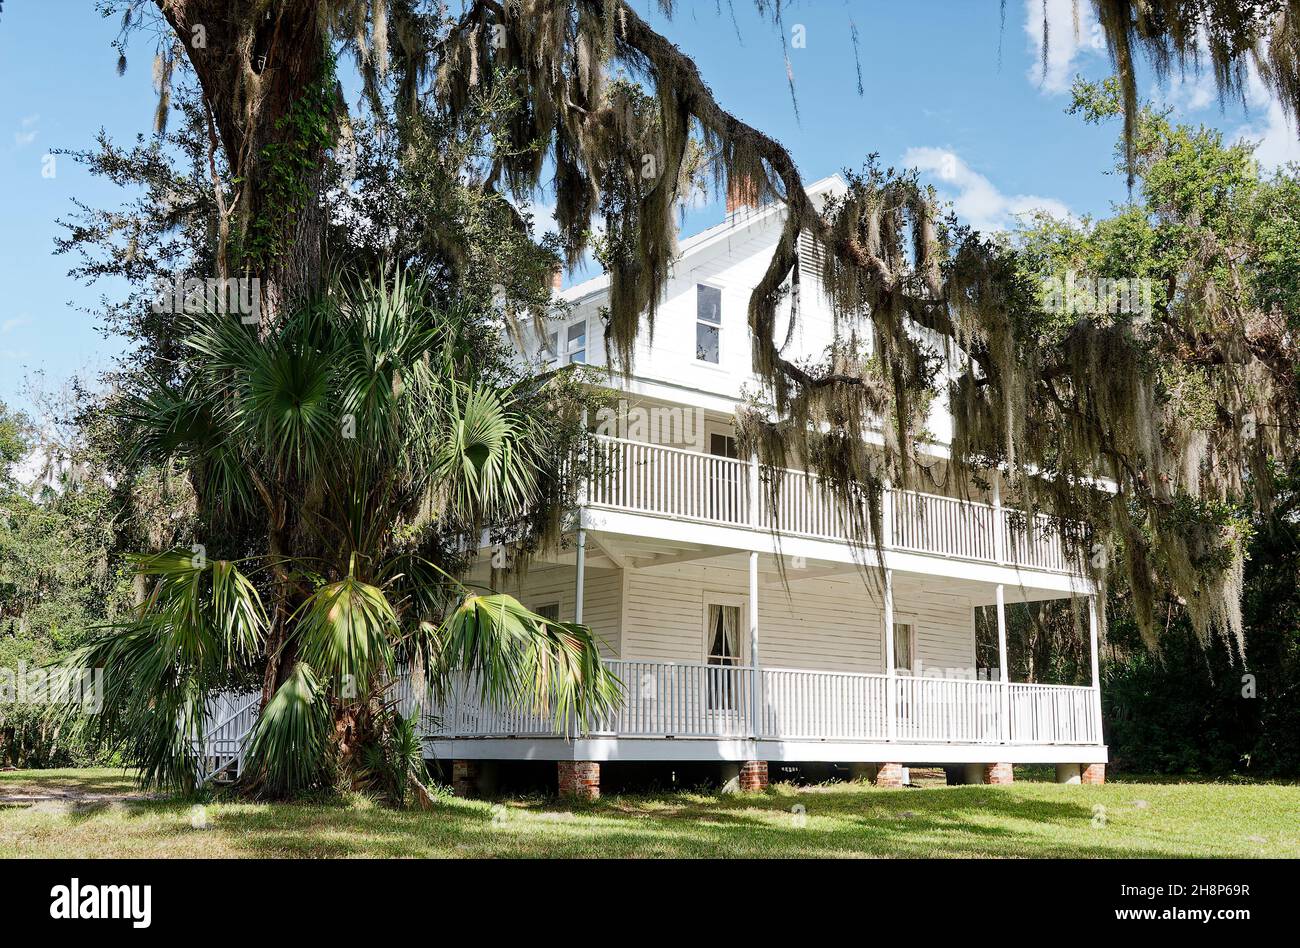 Louis P. Thursby house, 1872, 3 story, monument to central Florida's frontier days, white, large porches, constructed of pine, historic, National Regi Stock Photo